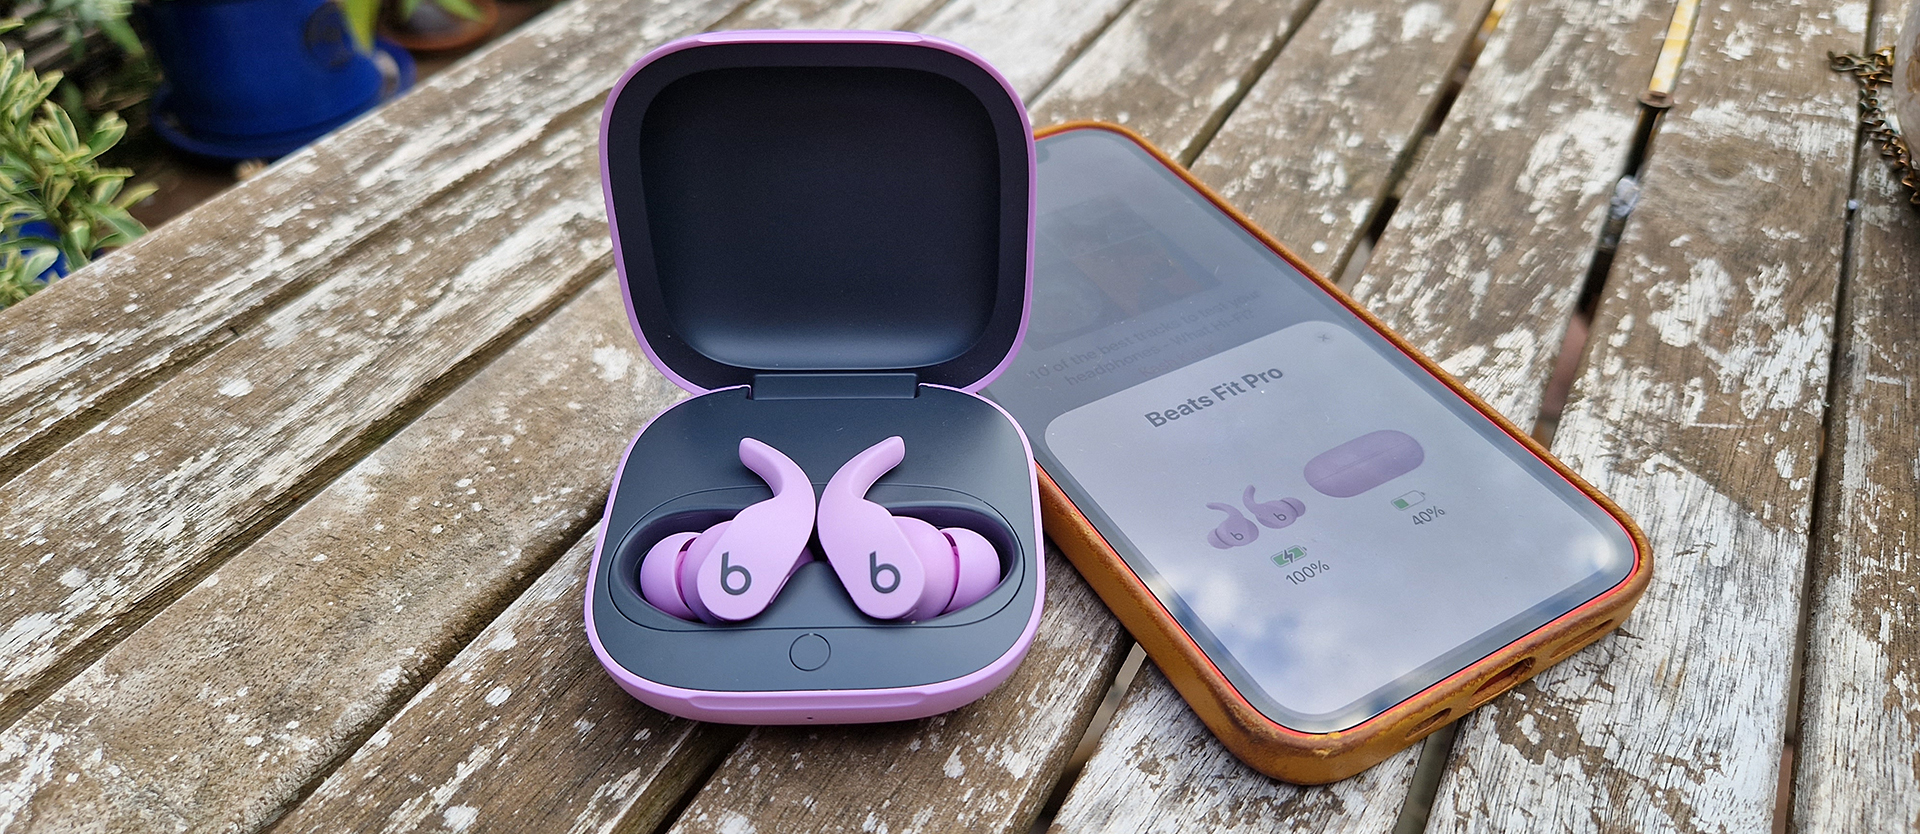 Samsung Galaxy Buds Review: The New Wireless Earbuds to Beat